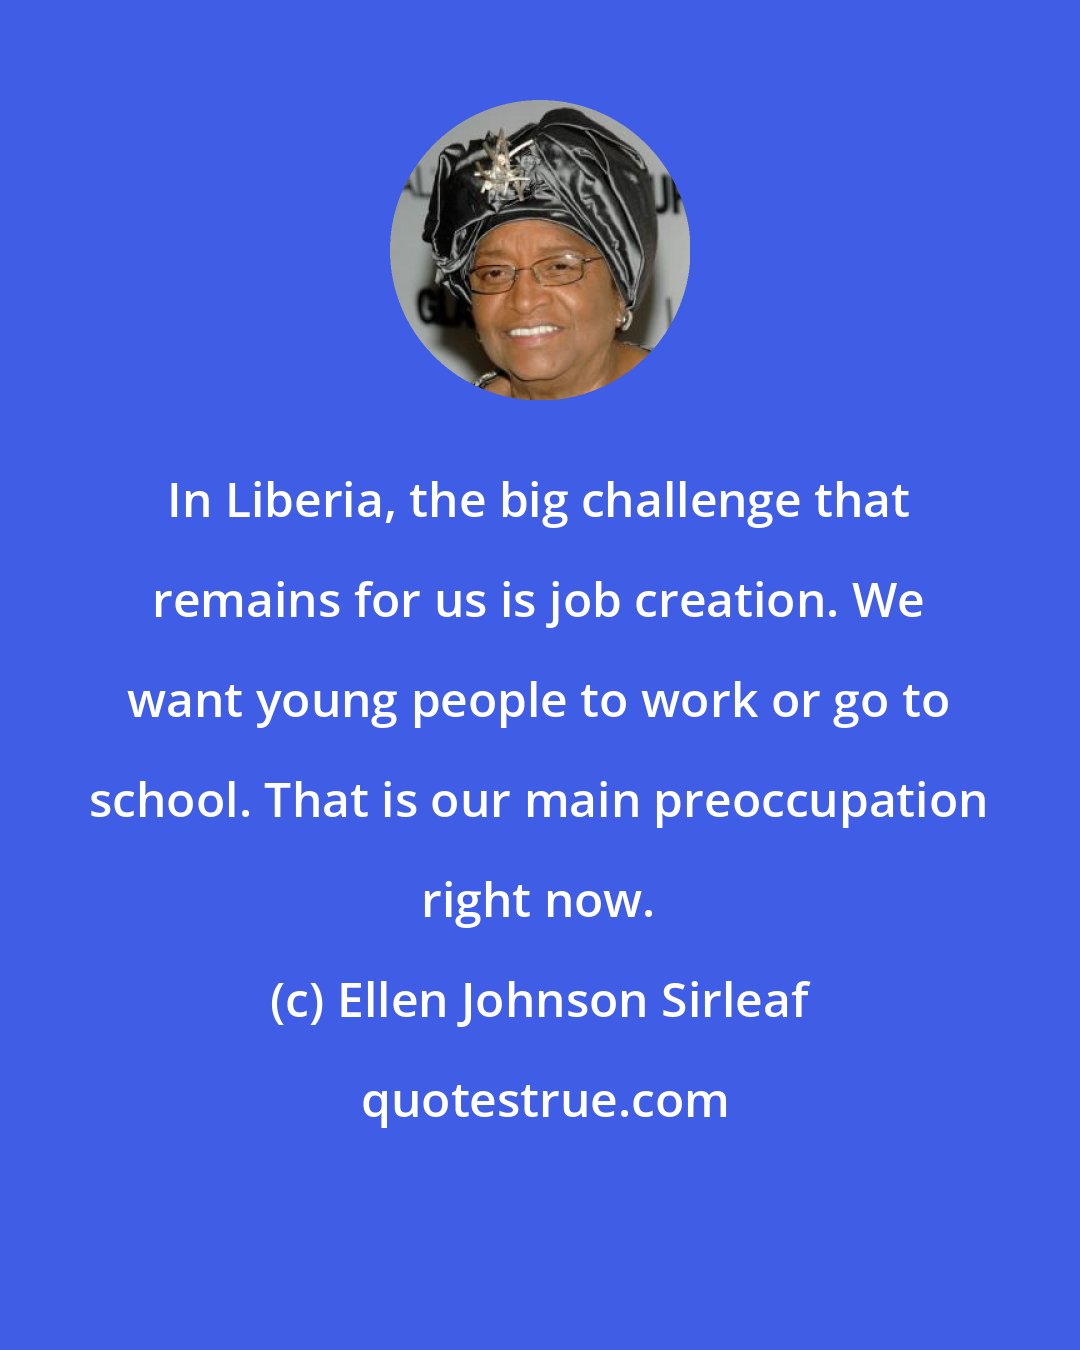 Ellen Johnson Sirleaf: In Liberia, the big challenge that remains for us is job creation. We want young people to work or go to school. That is our main preoccupation right now.